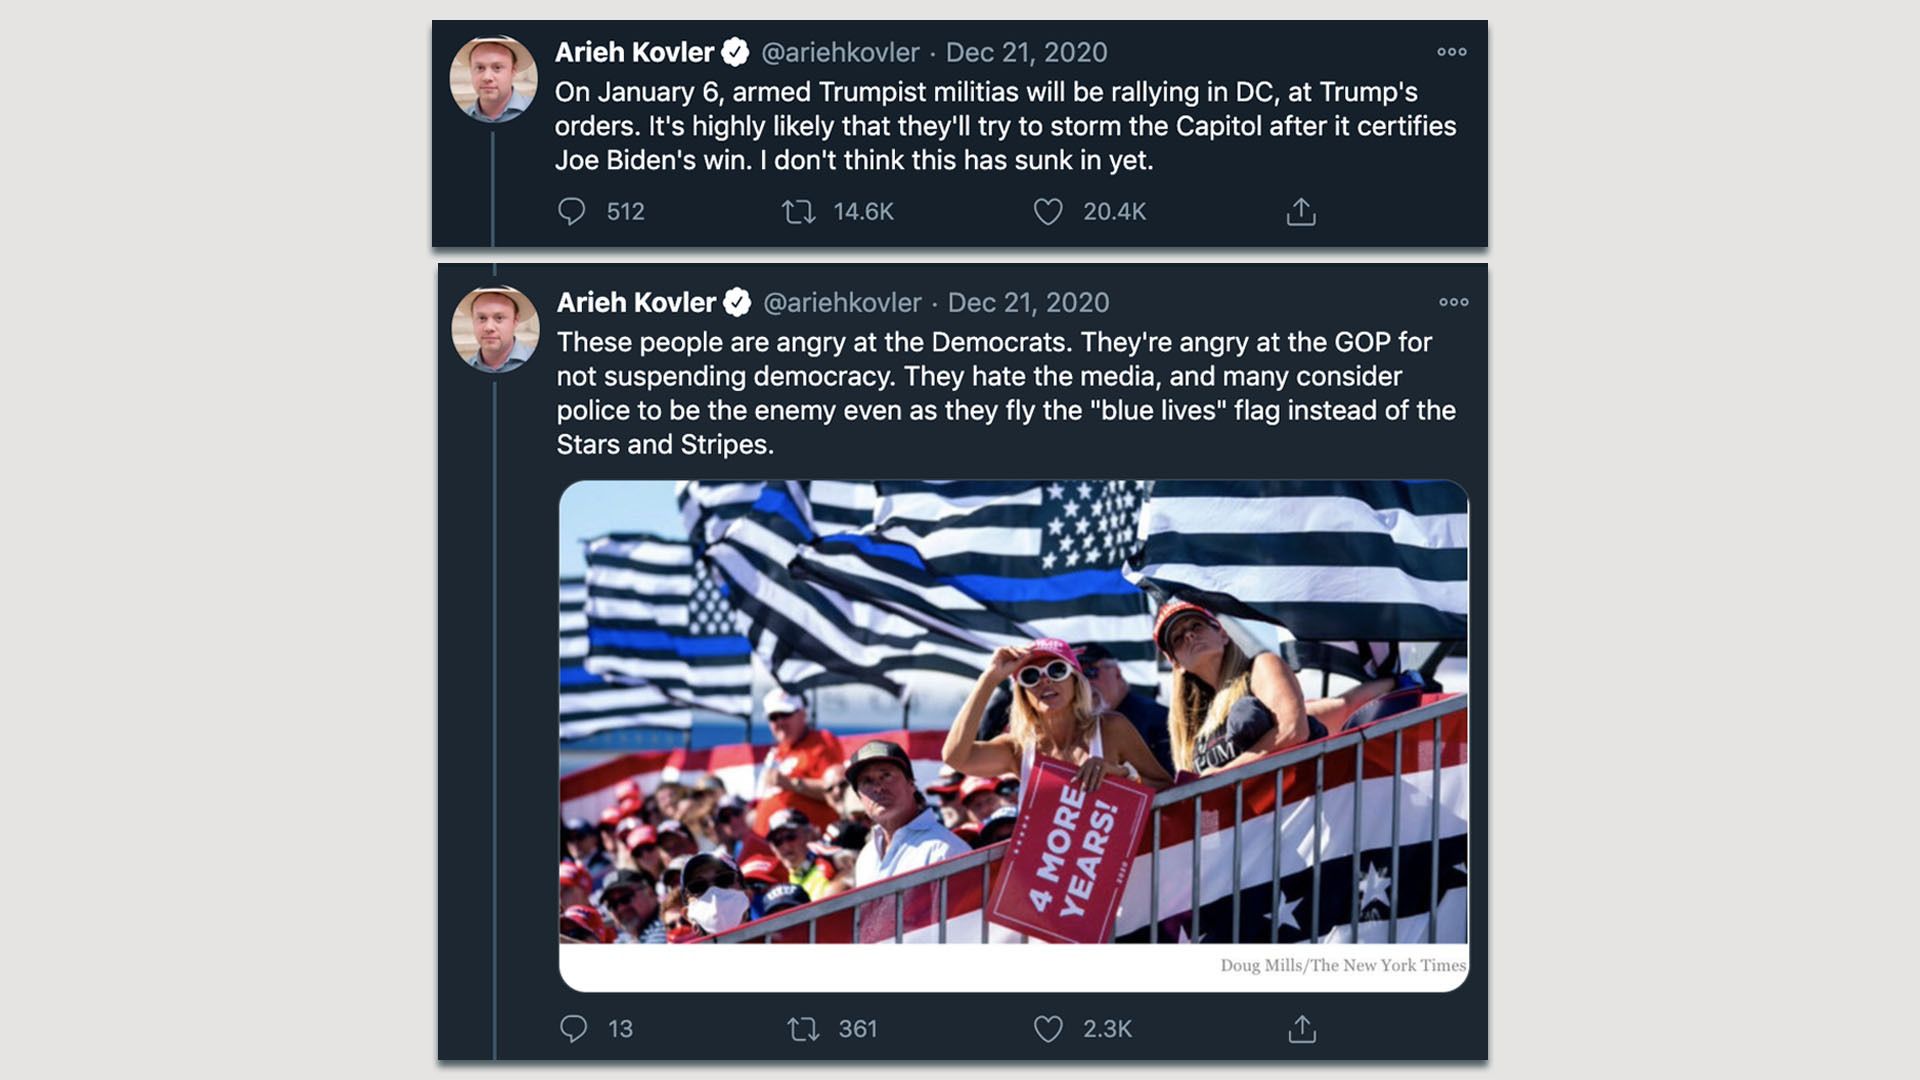 A screenshot shows Arieh Kovler's tweets predicting the storming of the Capitol this week.